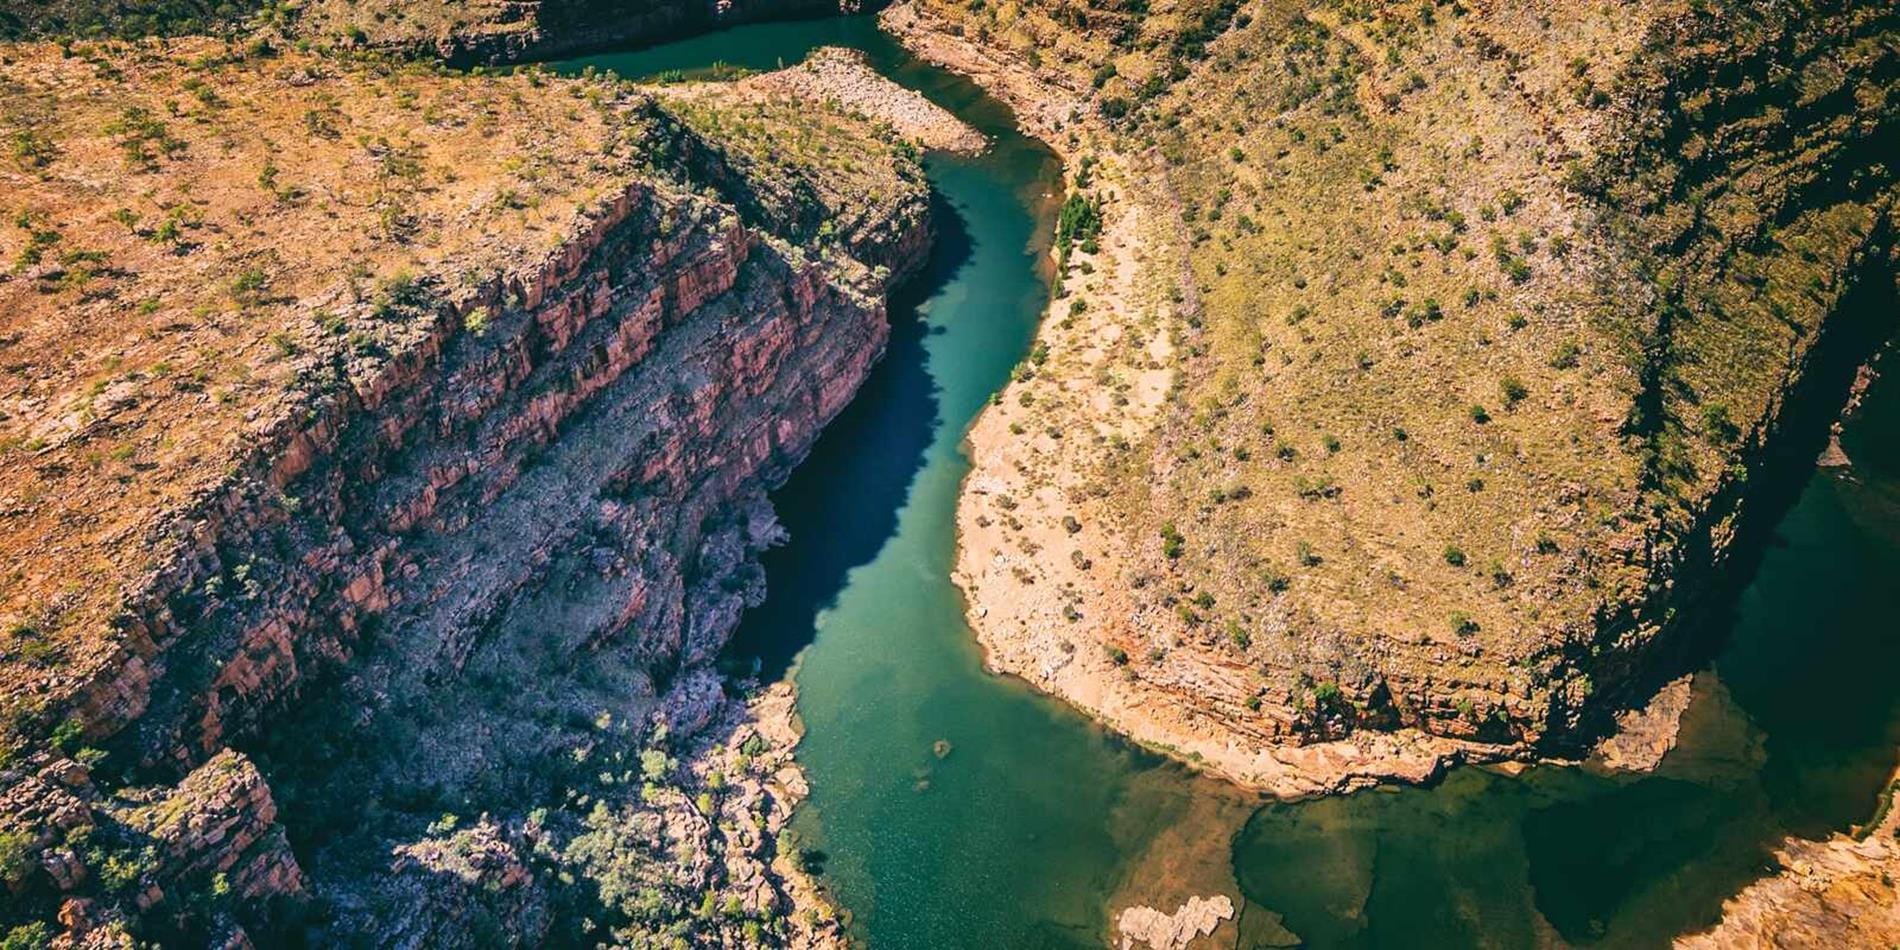 Looking down at Emma Gorge river as it snakes through the Kimberley